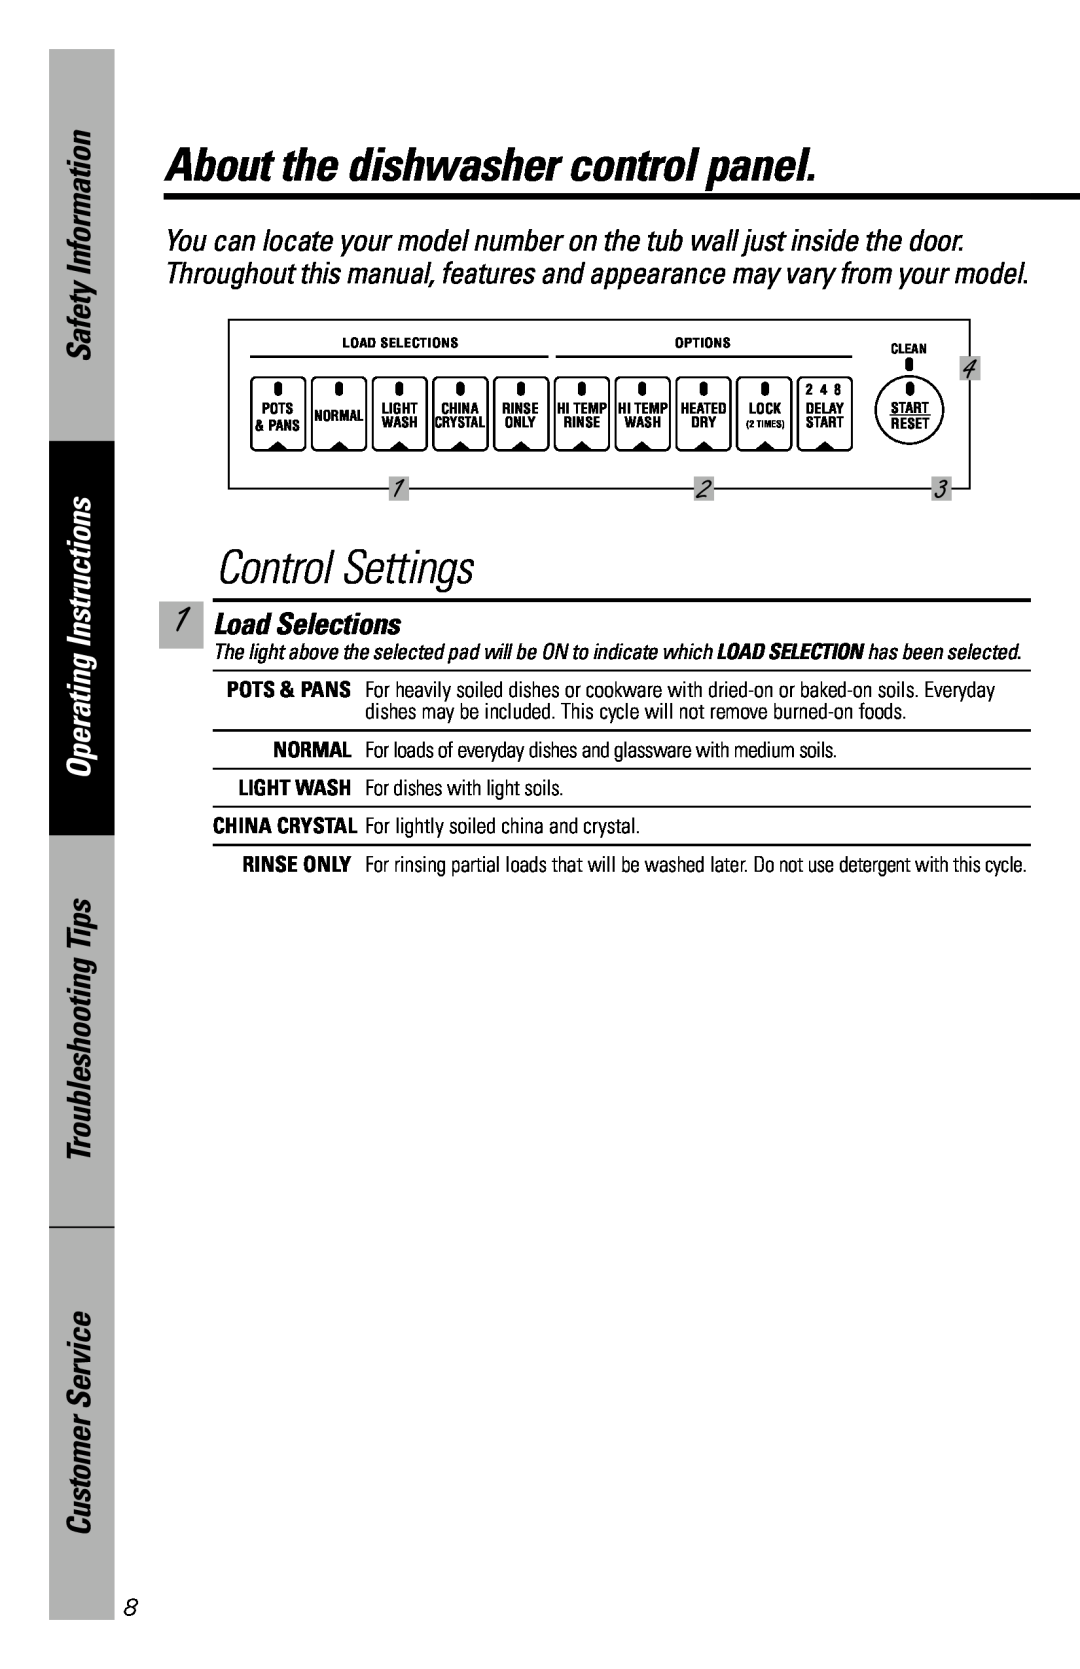 GE GSD5340, GSD5330 About the dishwasher control panel, Control Settings, Safety Information, Operating Instructions 